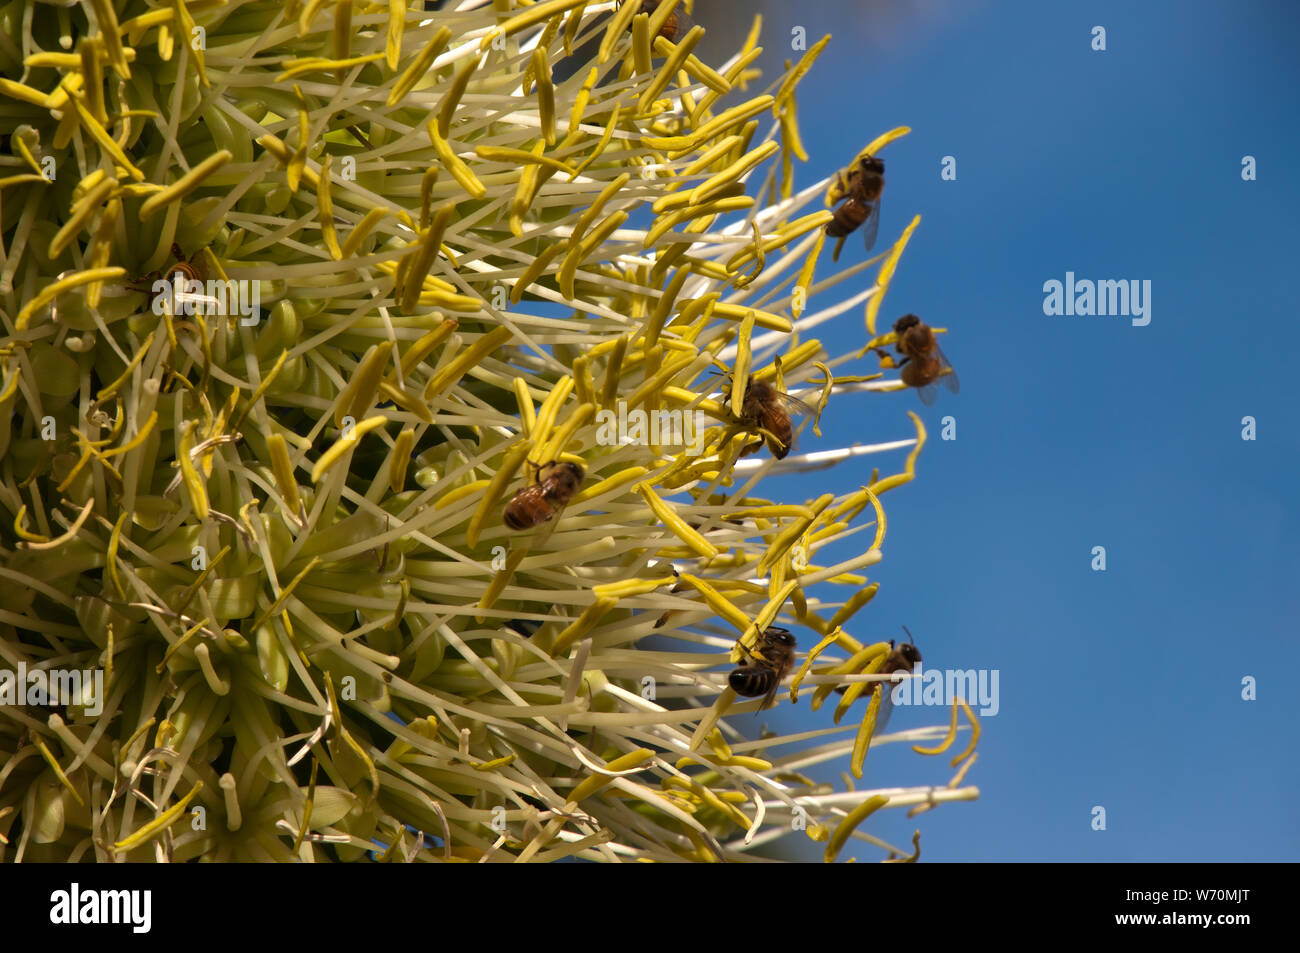 Sydney Australia, close-up of bees hovering over flowers of a Swan's Neck agave Stock Photo